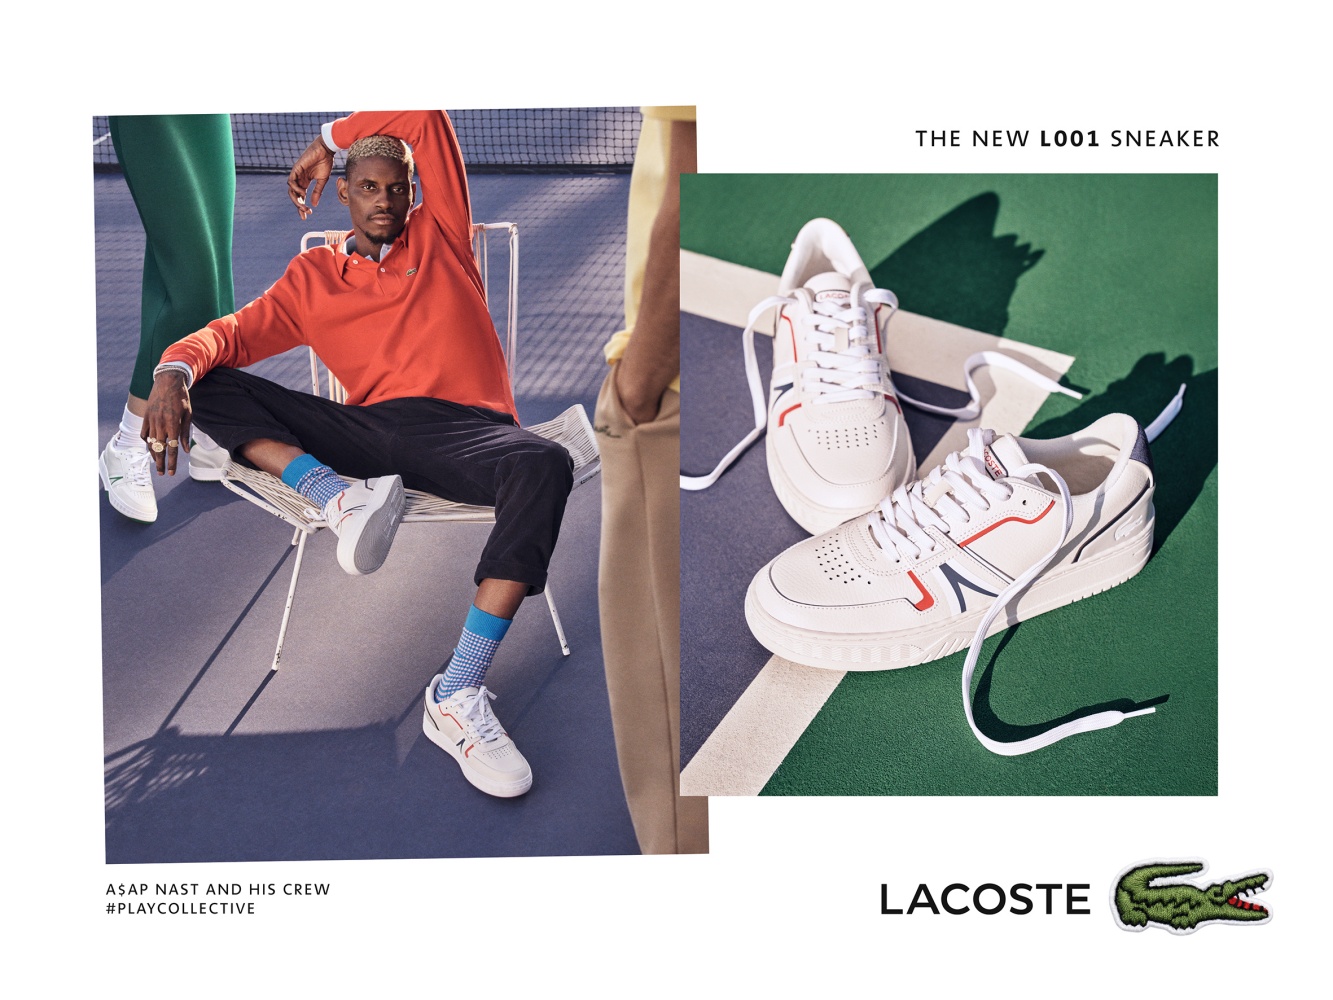 BZ-Lacoste-L001-hinh-anh-3 